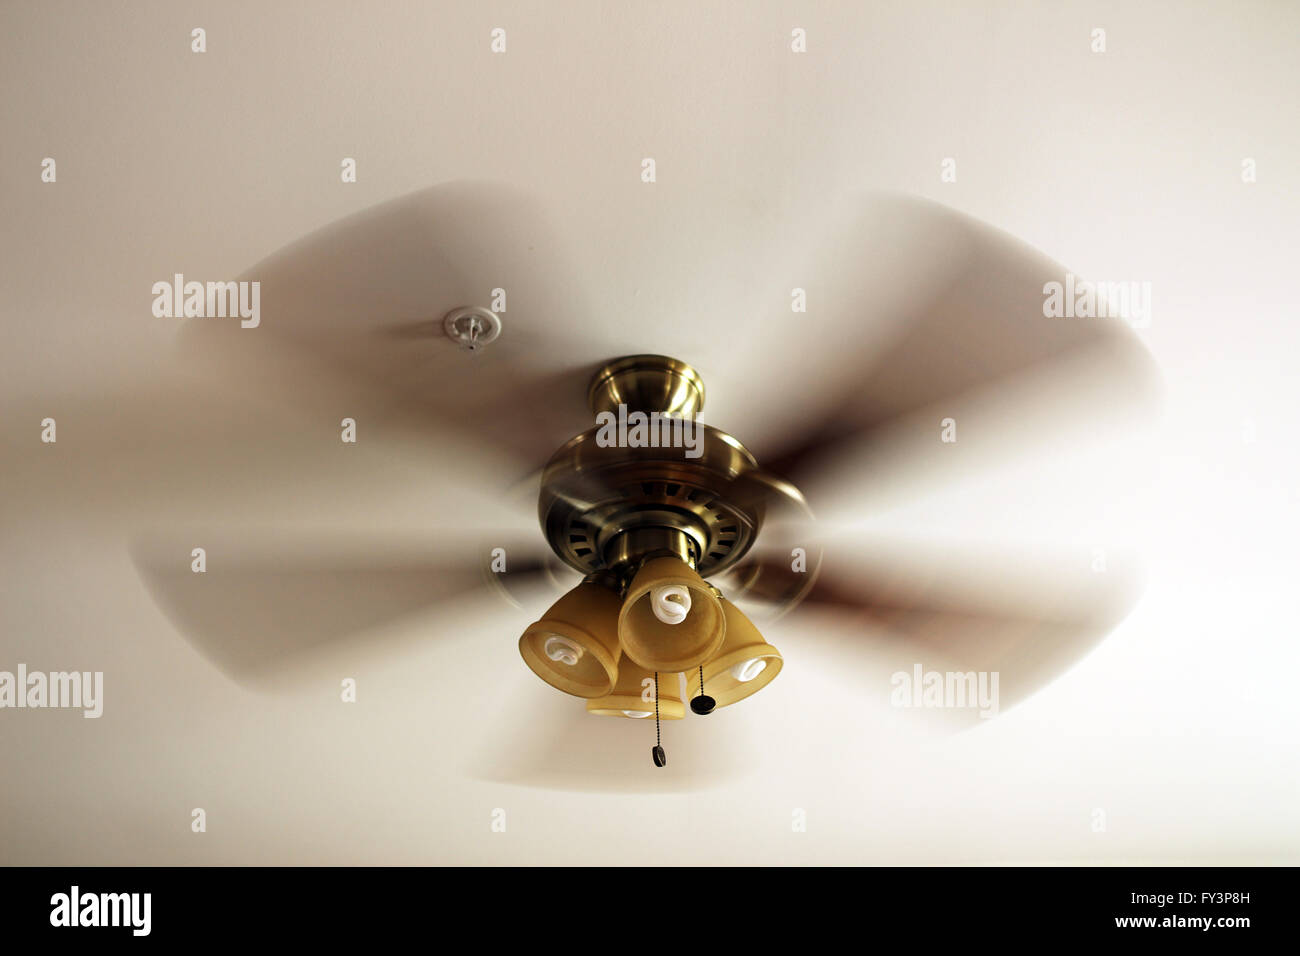 Moving ceiling fan Stock Photo